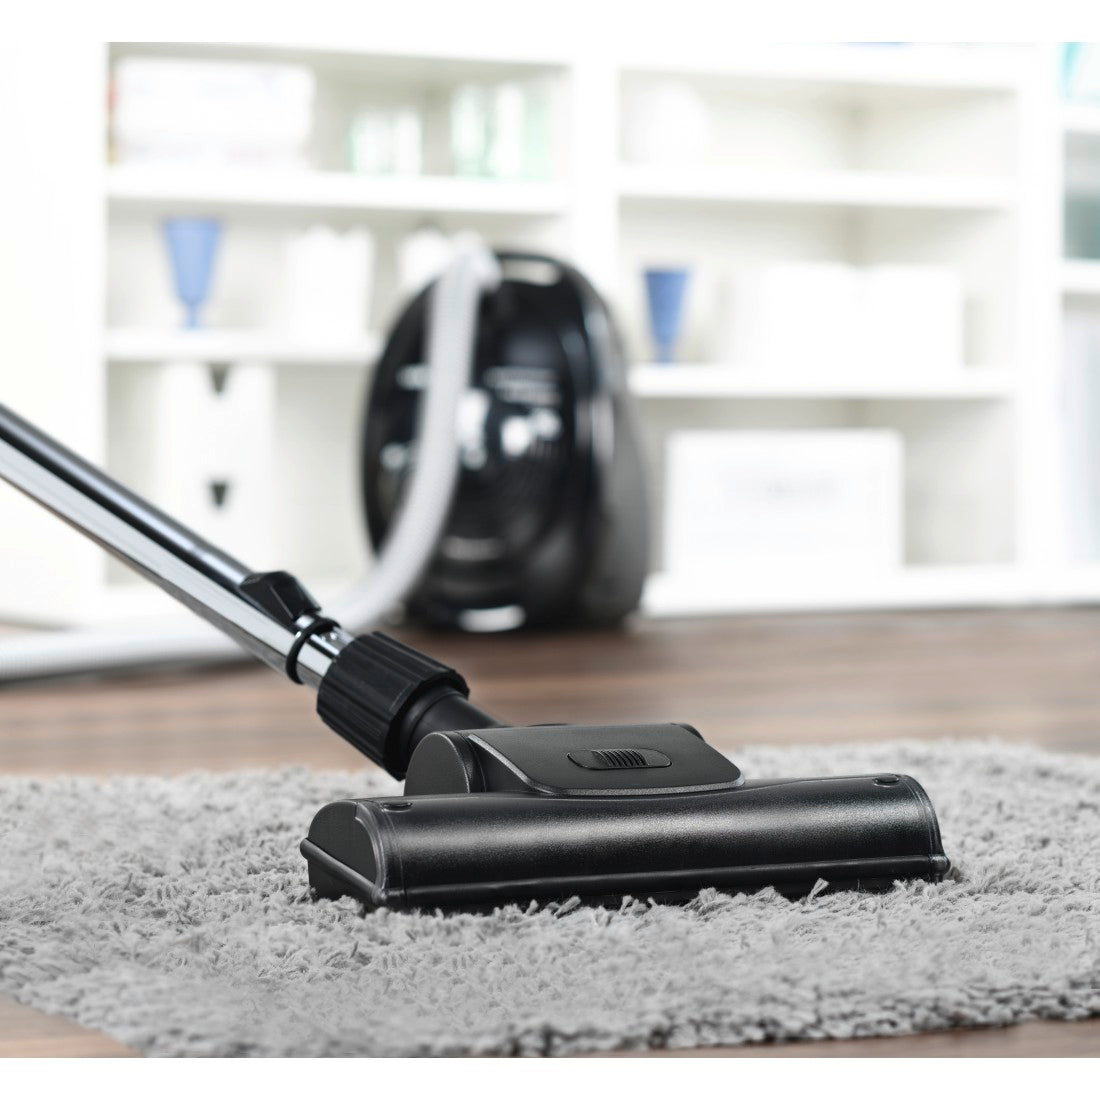 Xavax Turbo Brush with Universal Connection for Vacuum Cleaners - Black | 434197 (7558493700284)